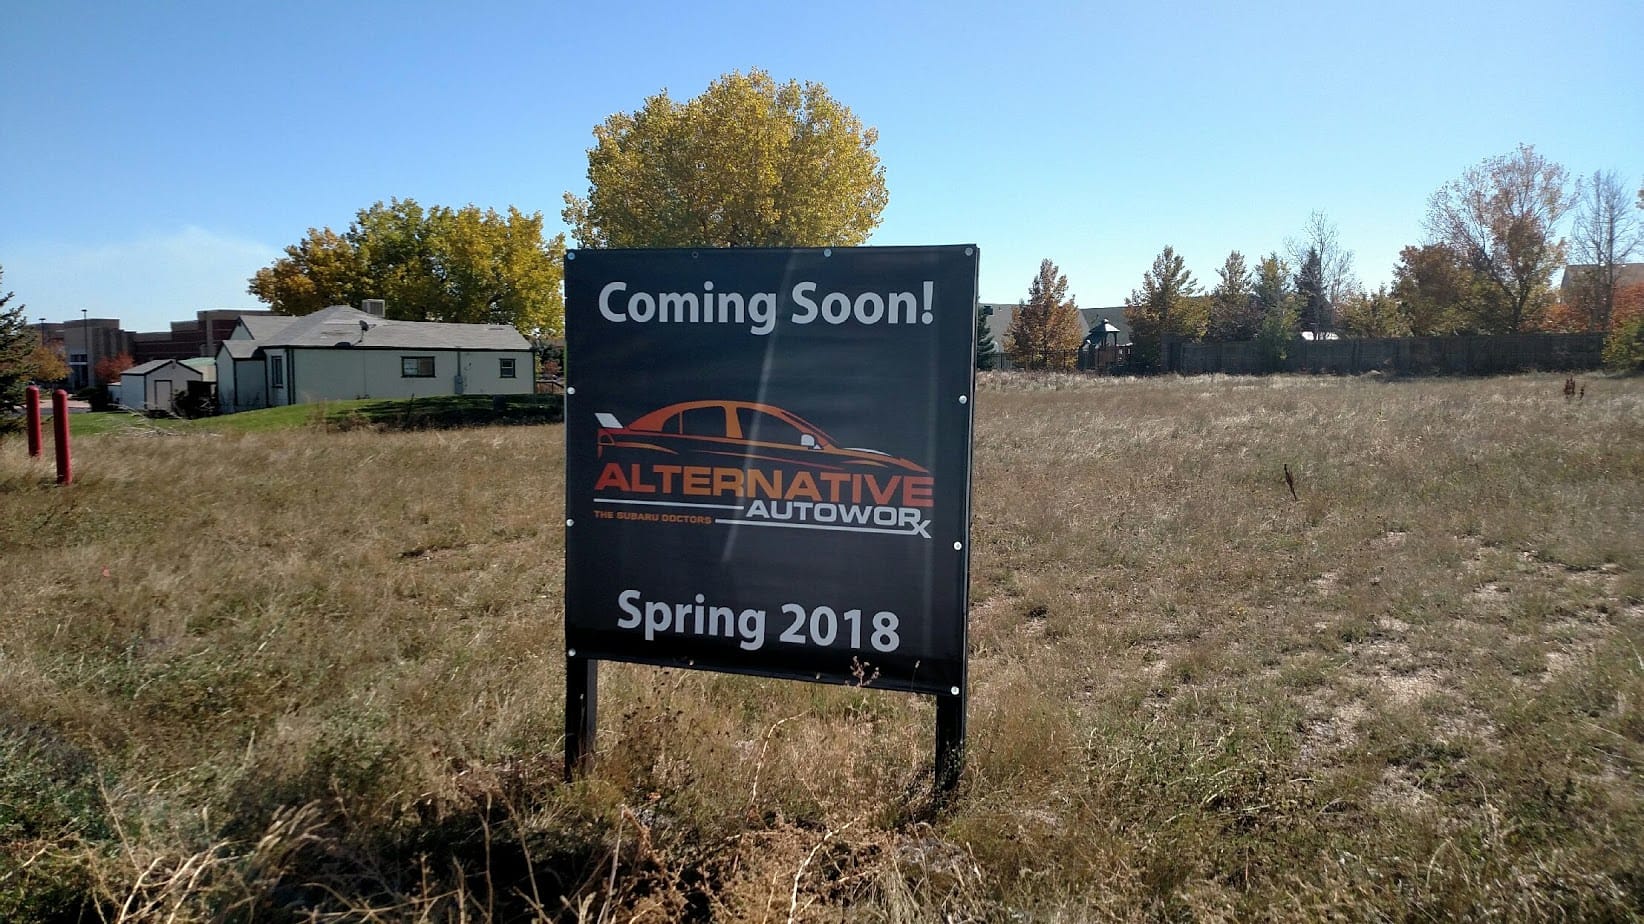 Alternative Autoworx will be soon moving to our new location, currently under construction at 5540 W 120th in Broomfield, CO! We will continue to offer the same great Subaru repair & maintenance during and following the move!